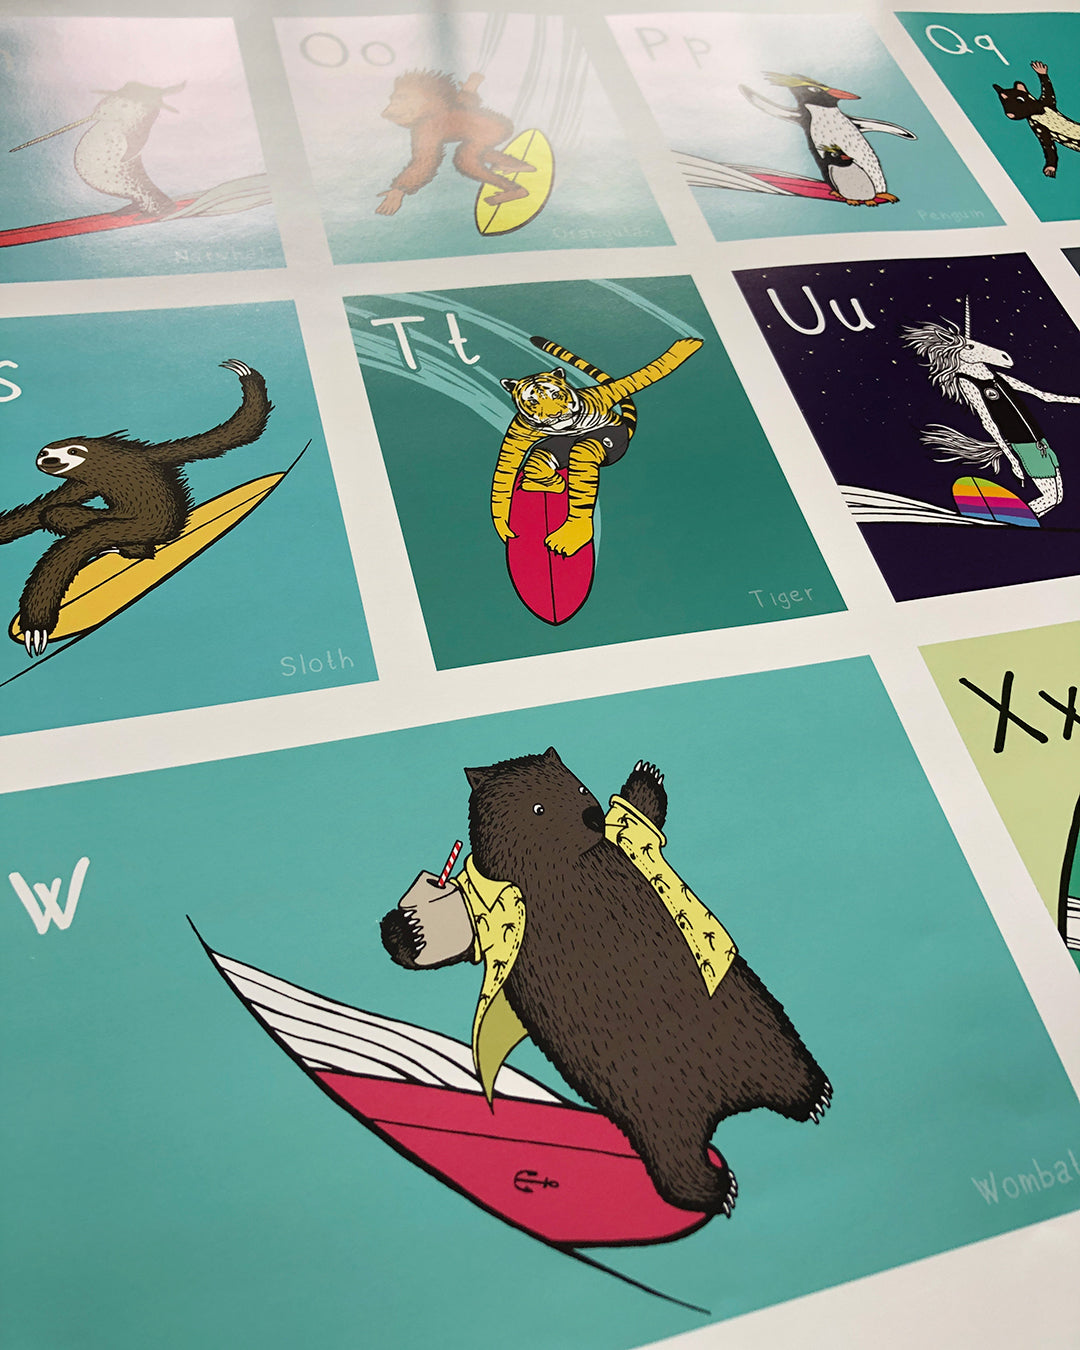 The Surfing Animals ABC Poster - 24x36